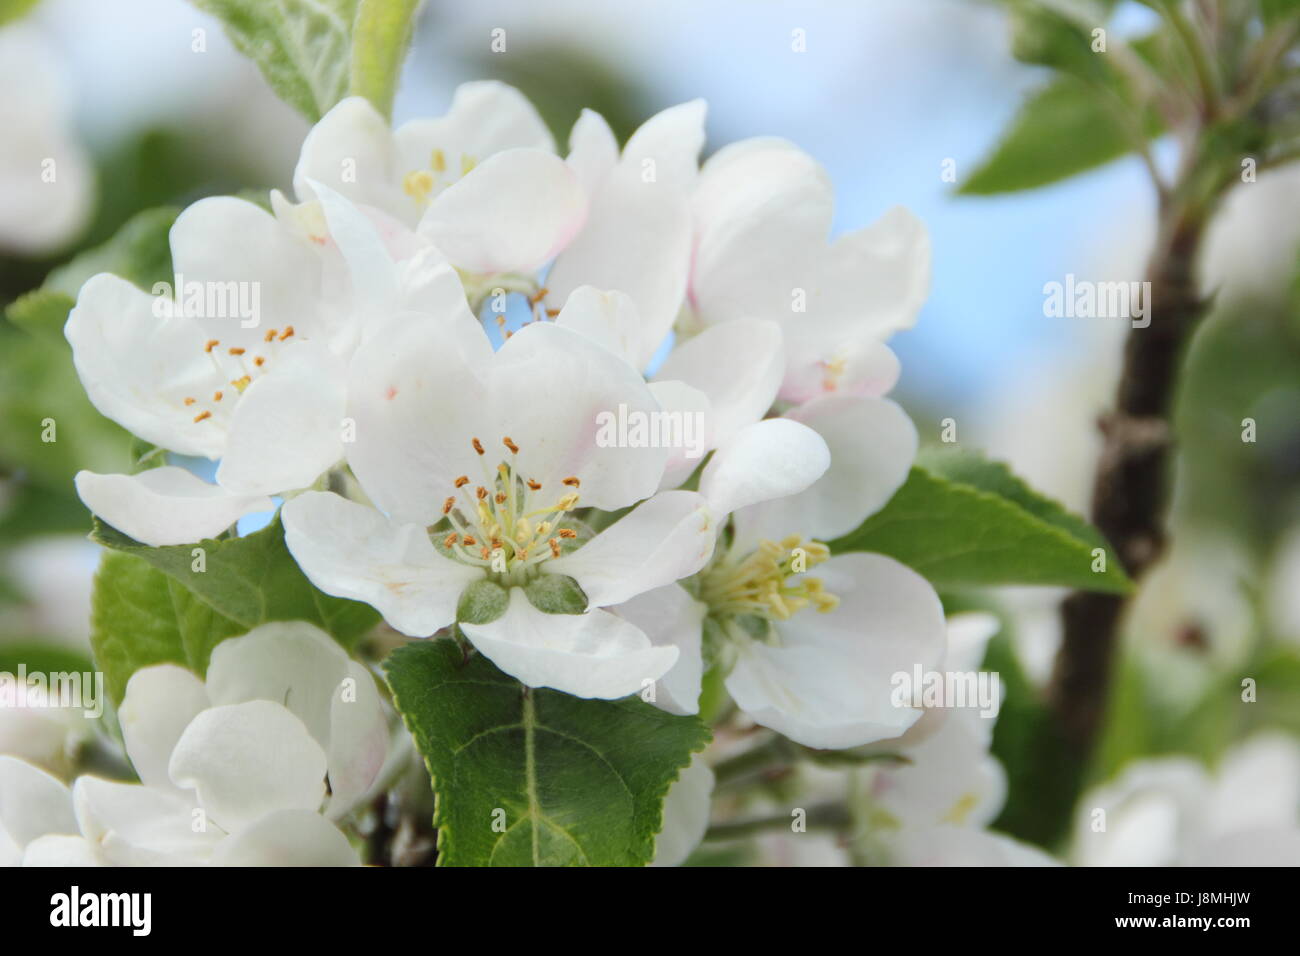 Malus domestica 'Discovery' apple tree in full bloom in an English orchard on a sunny spring day, England, UK Stock Photo